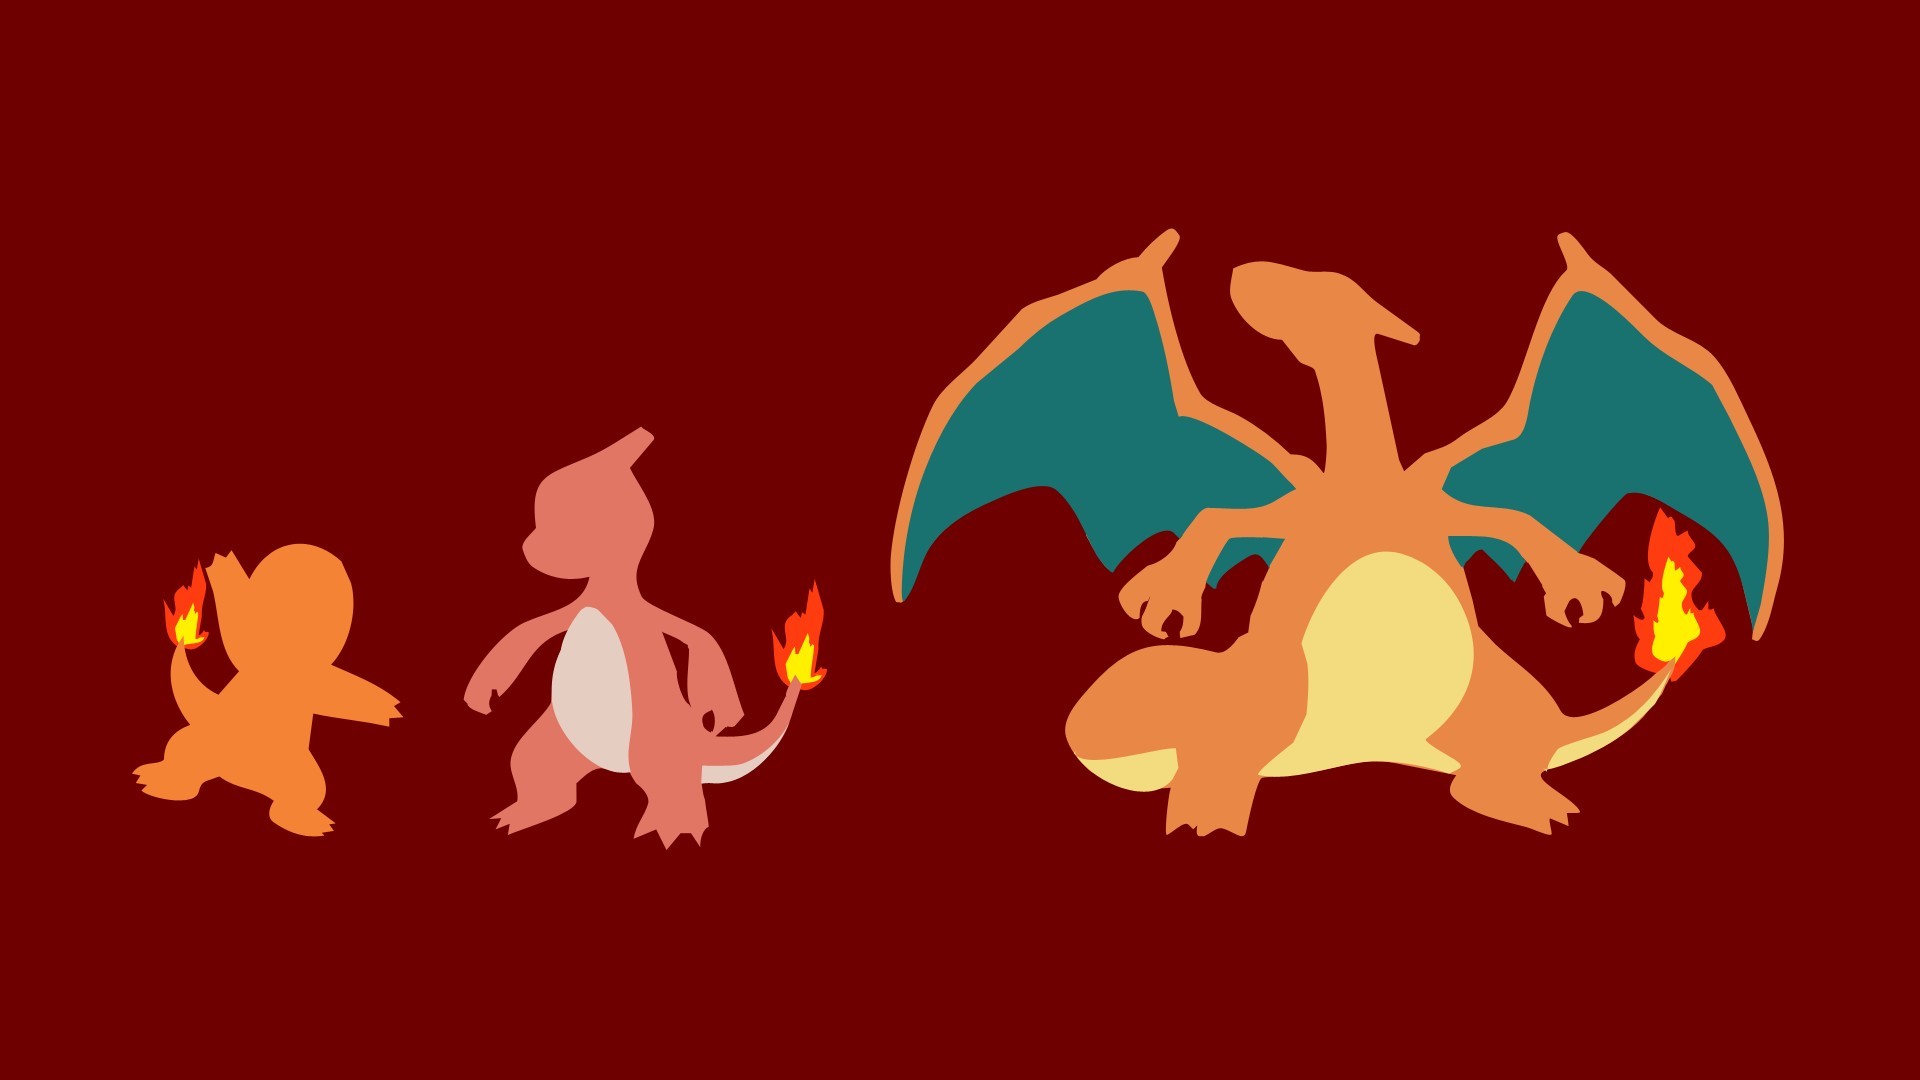 1920x1080 Charizard wallpaper 79+ - Page 2 of 3 - yese69.com - 4K Wallpapers World